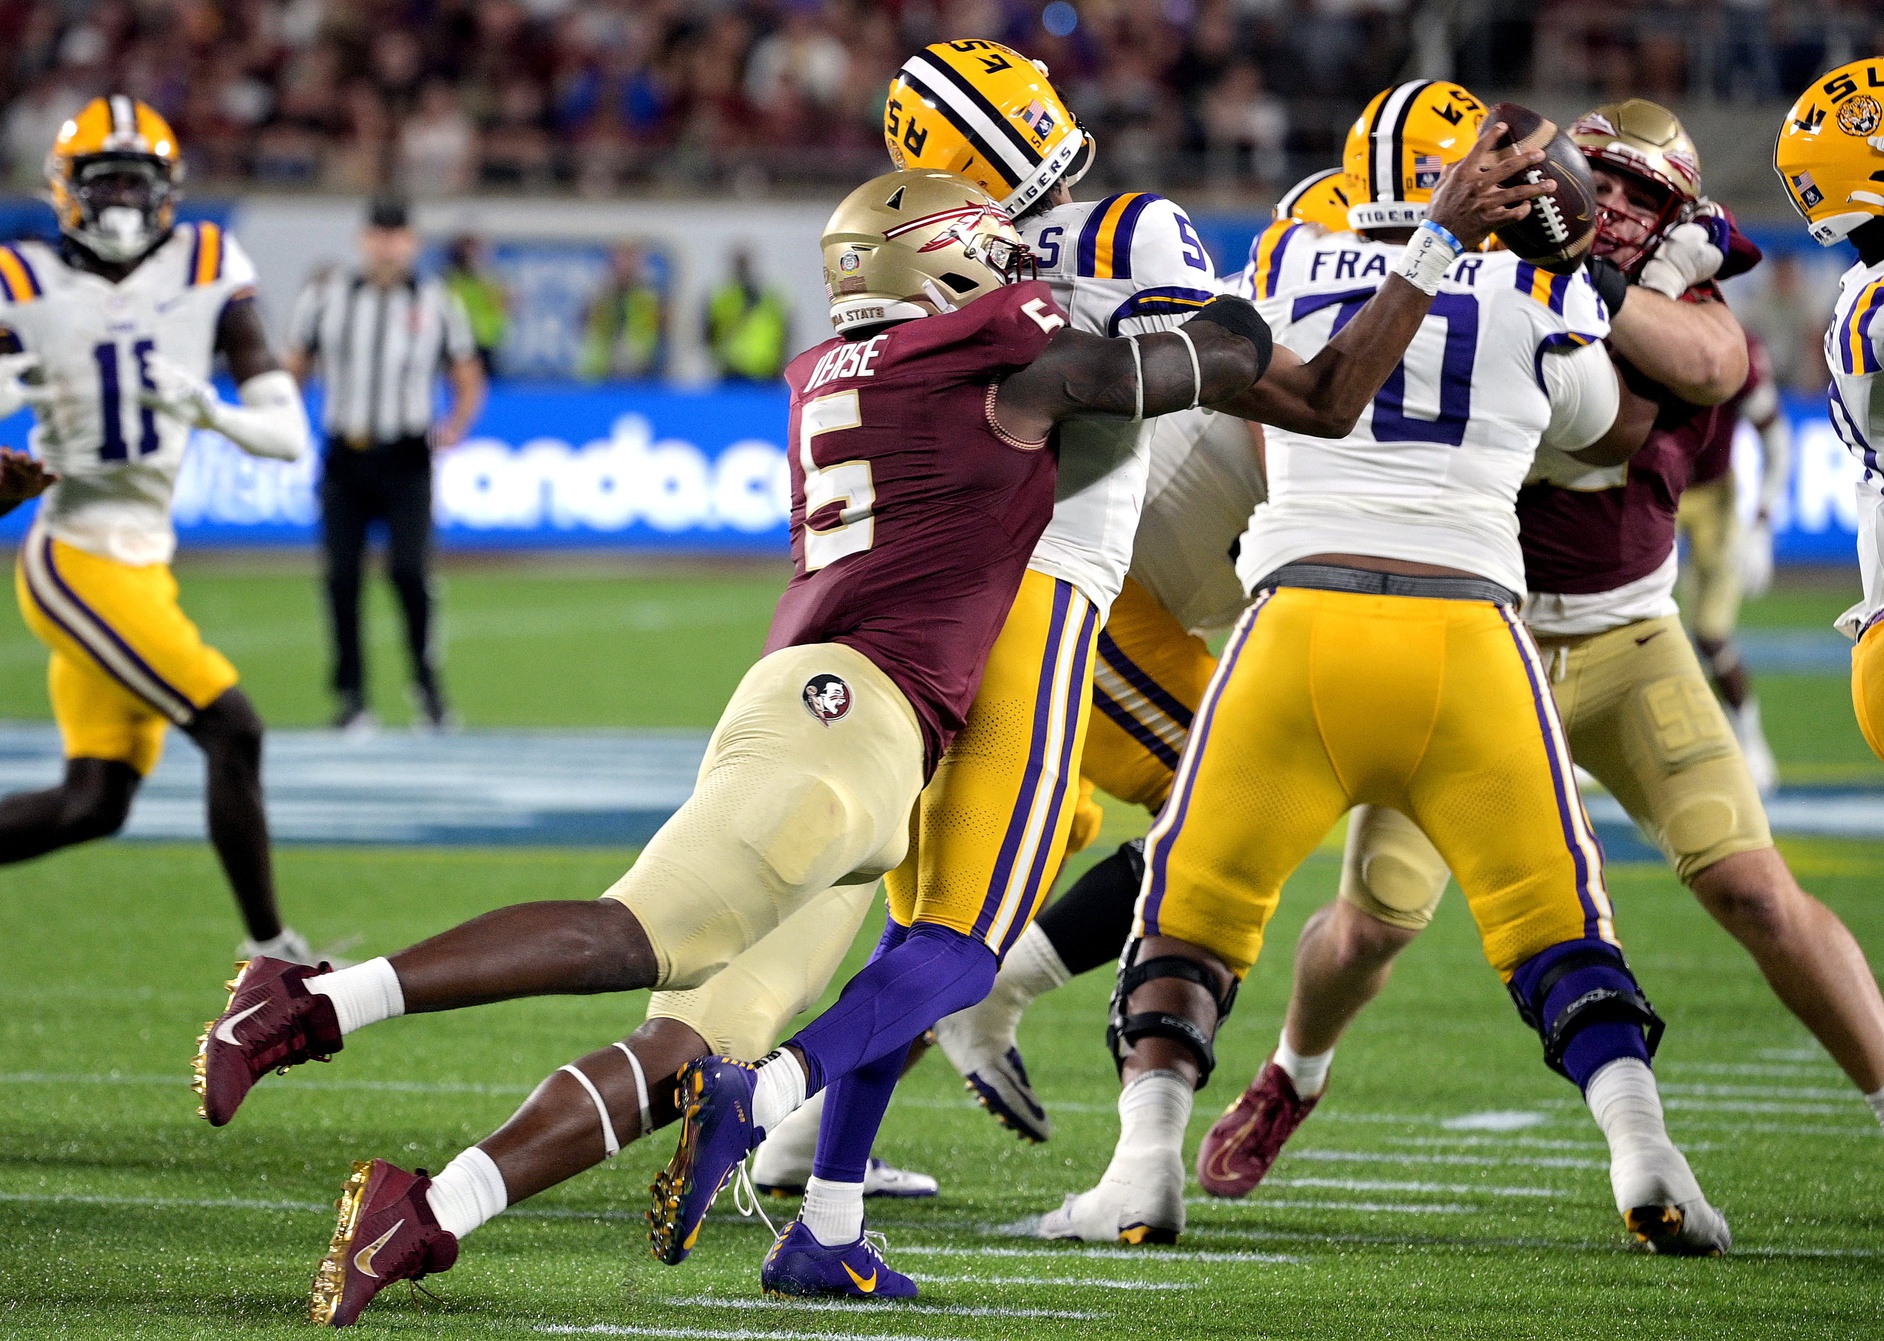 LSU Tigers quarterback Jayden Daniels (5) is sacked by Florida State Seminoles defensive end Jared Verse (5). Mandatory Credit: Melina Myers-USA TODAY Sports